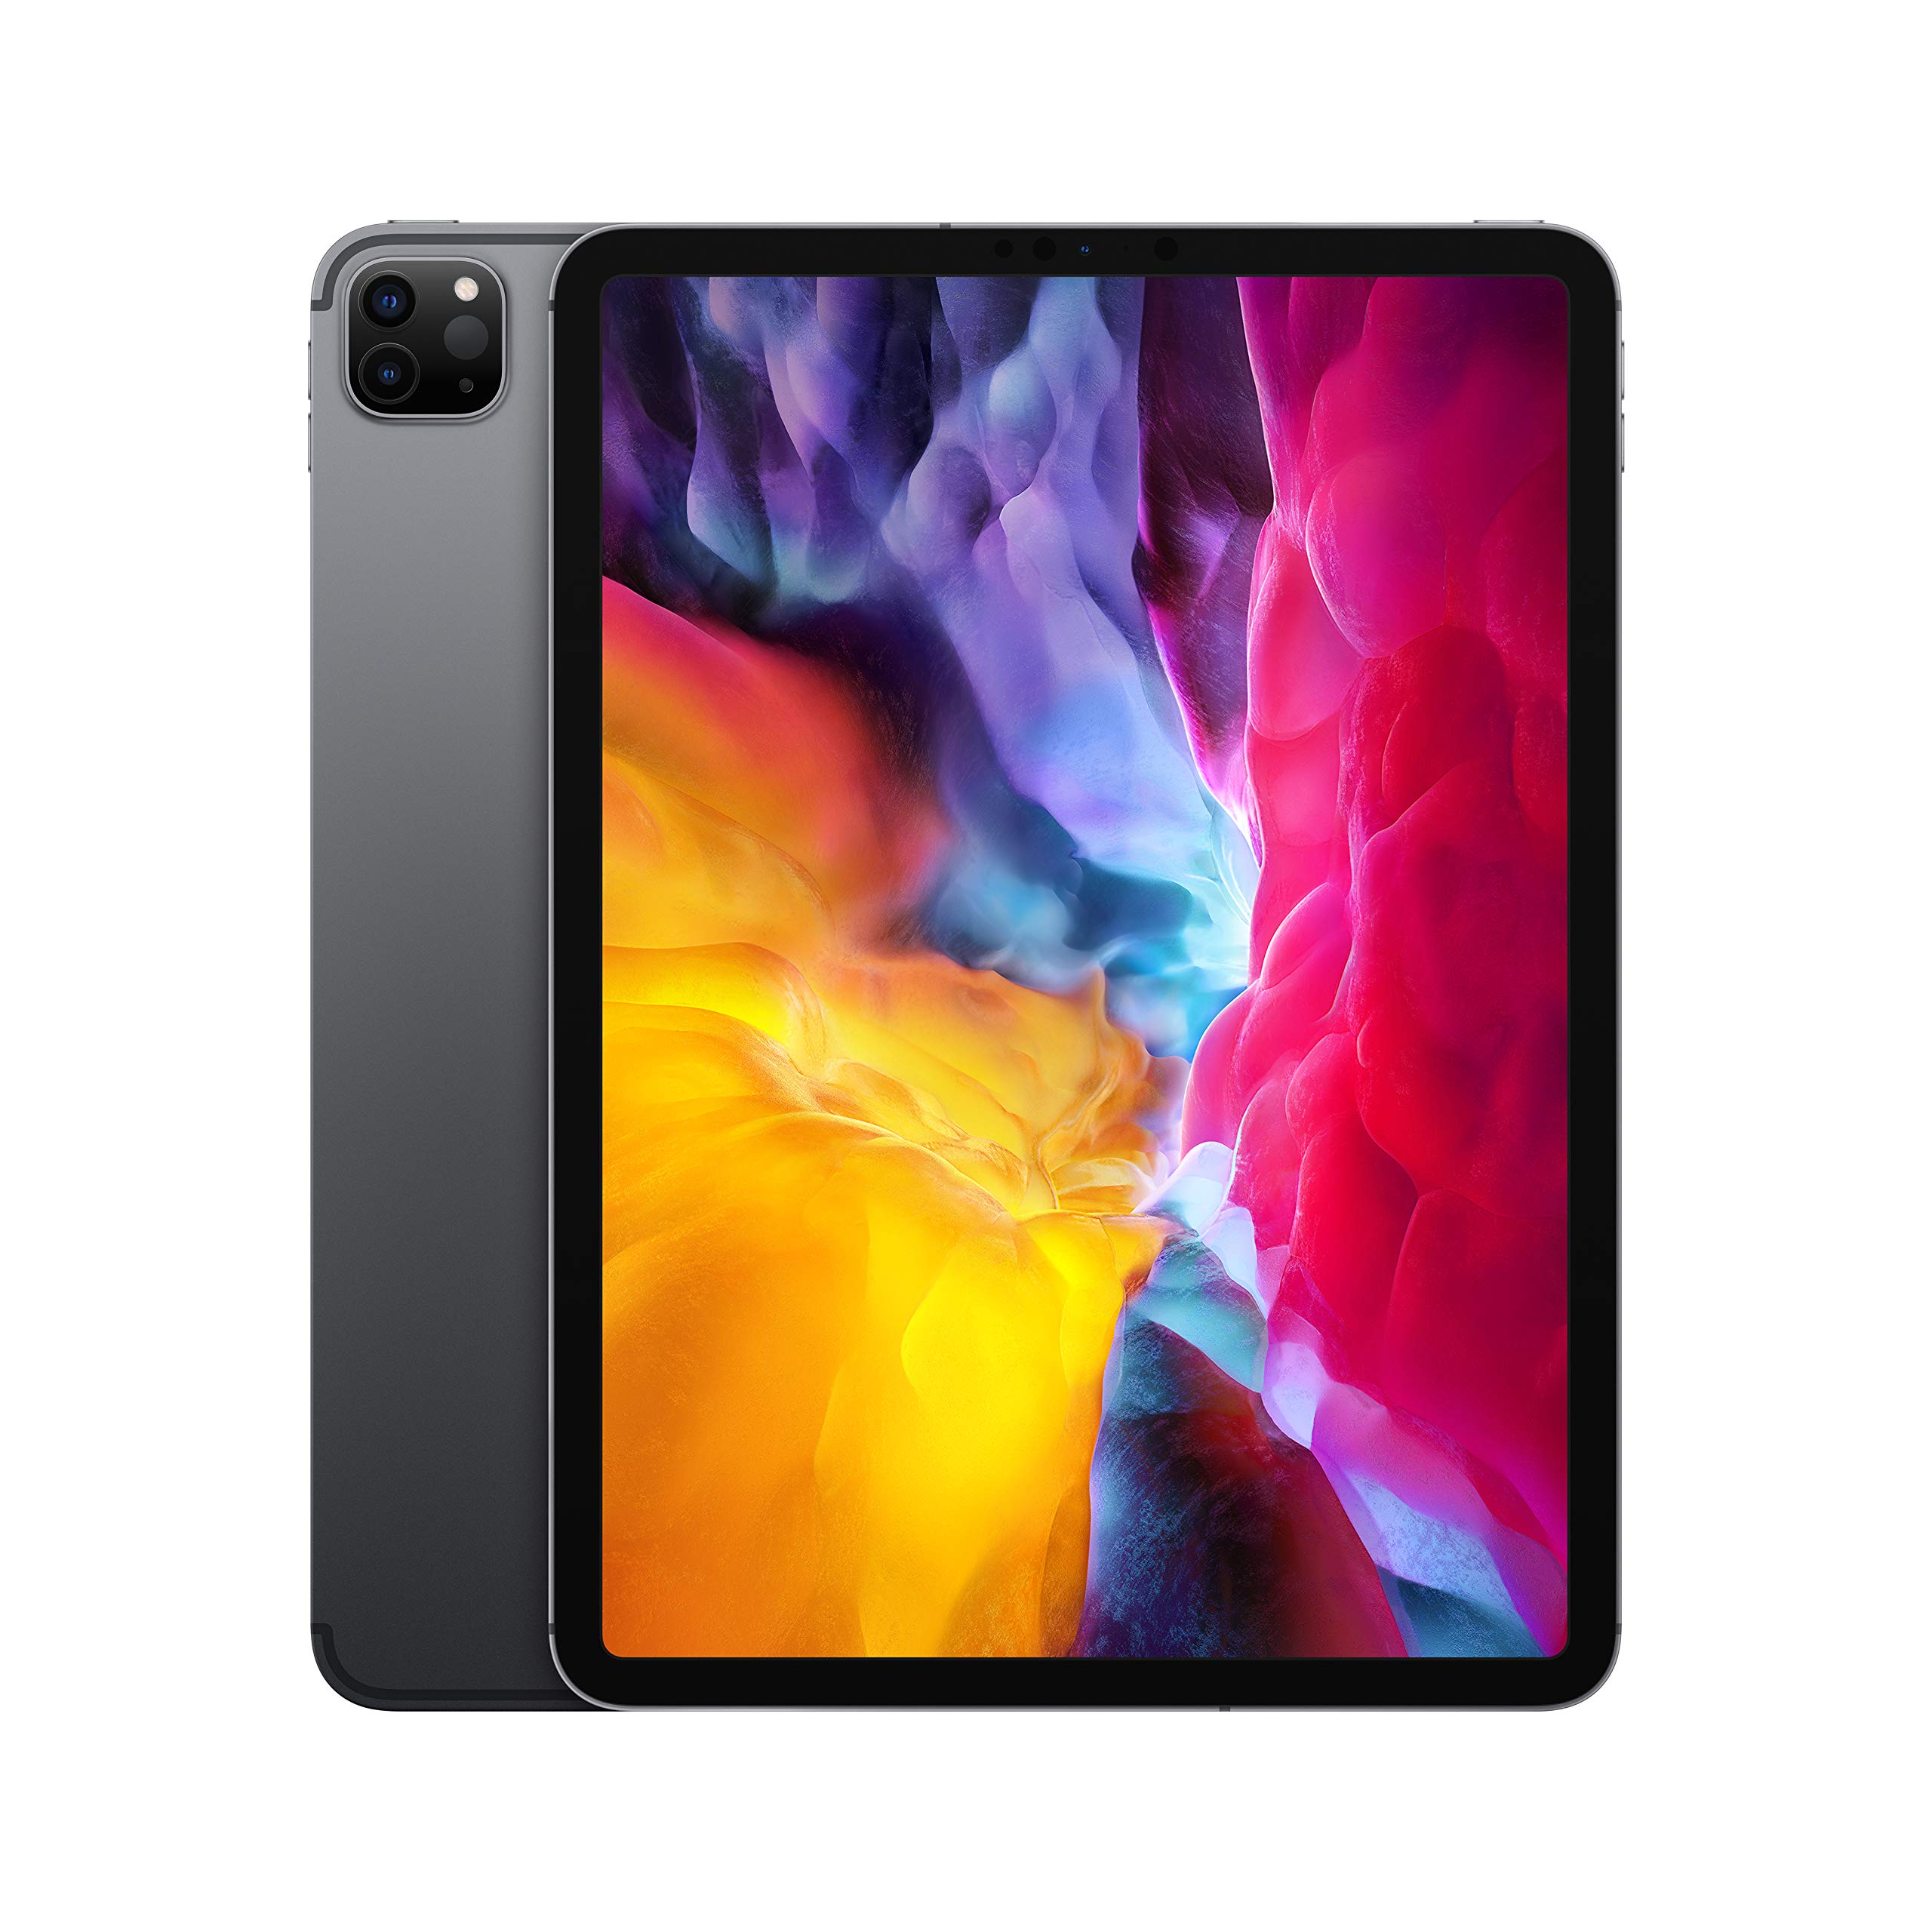 Apple 11-Inch iPad Pro (2nd Generation) with Wi-Fi 256GB Space Gray MXDC2LL/A - $749.99 at Best Buy